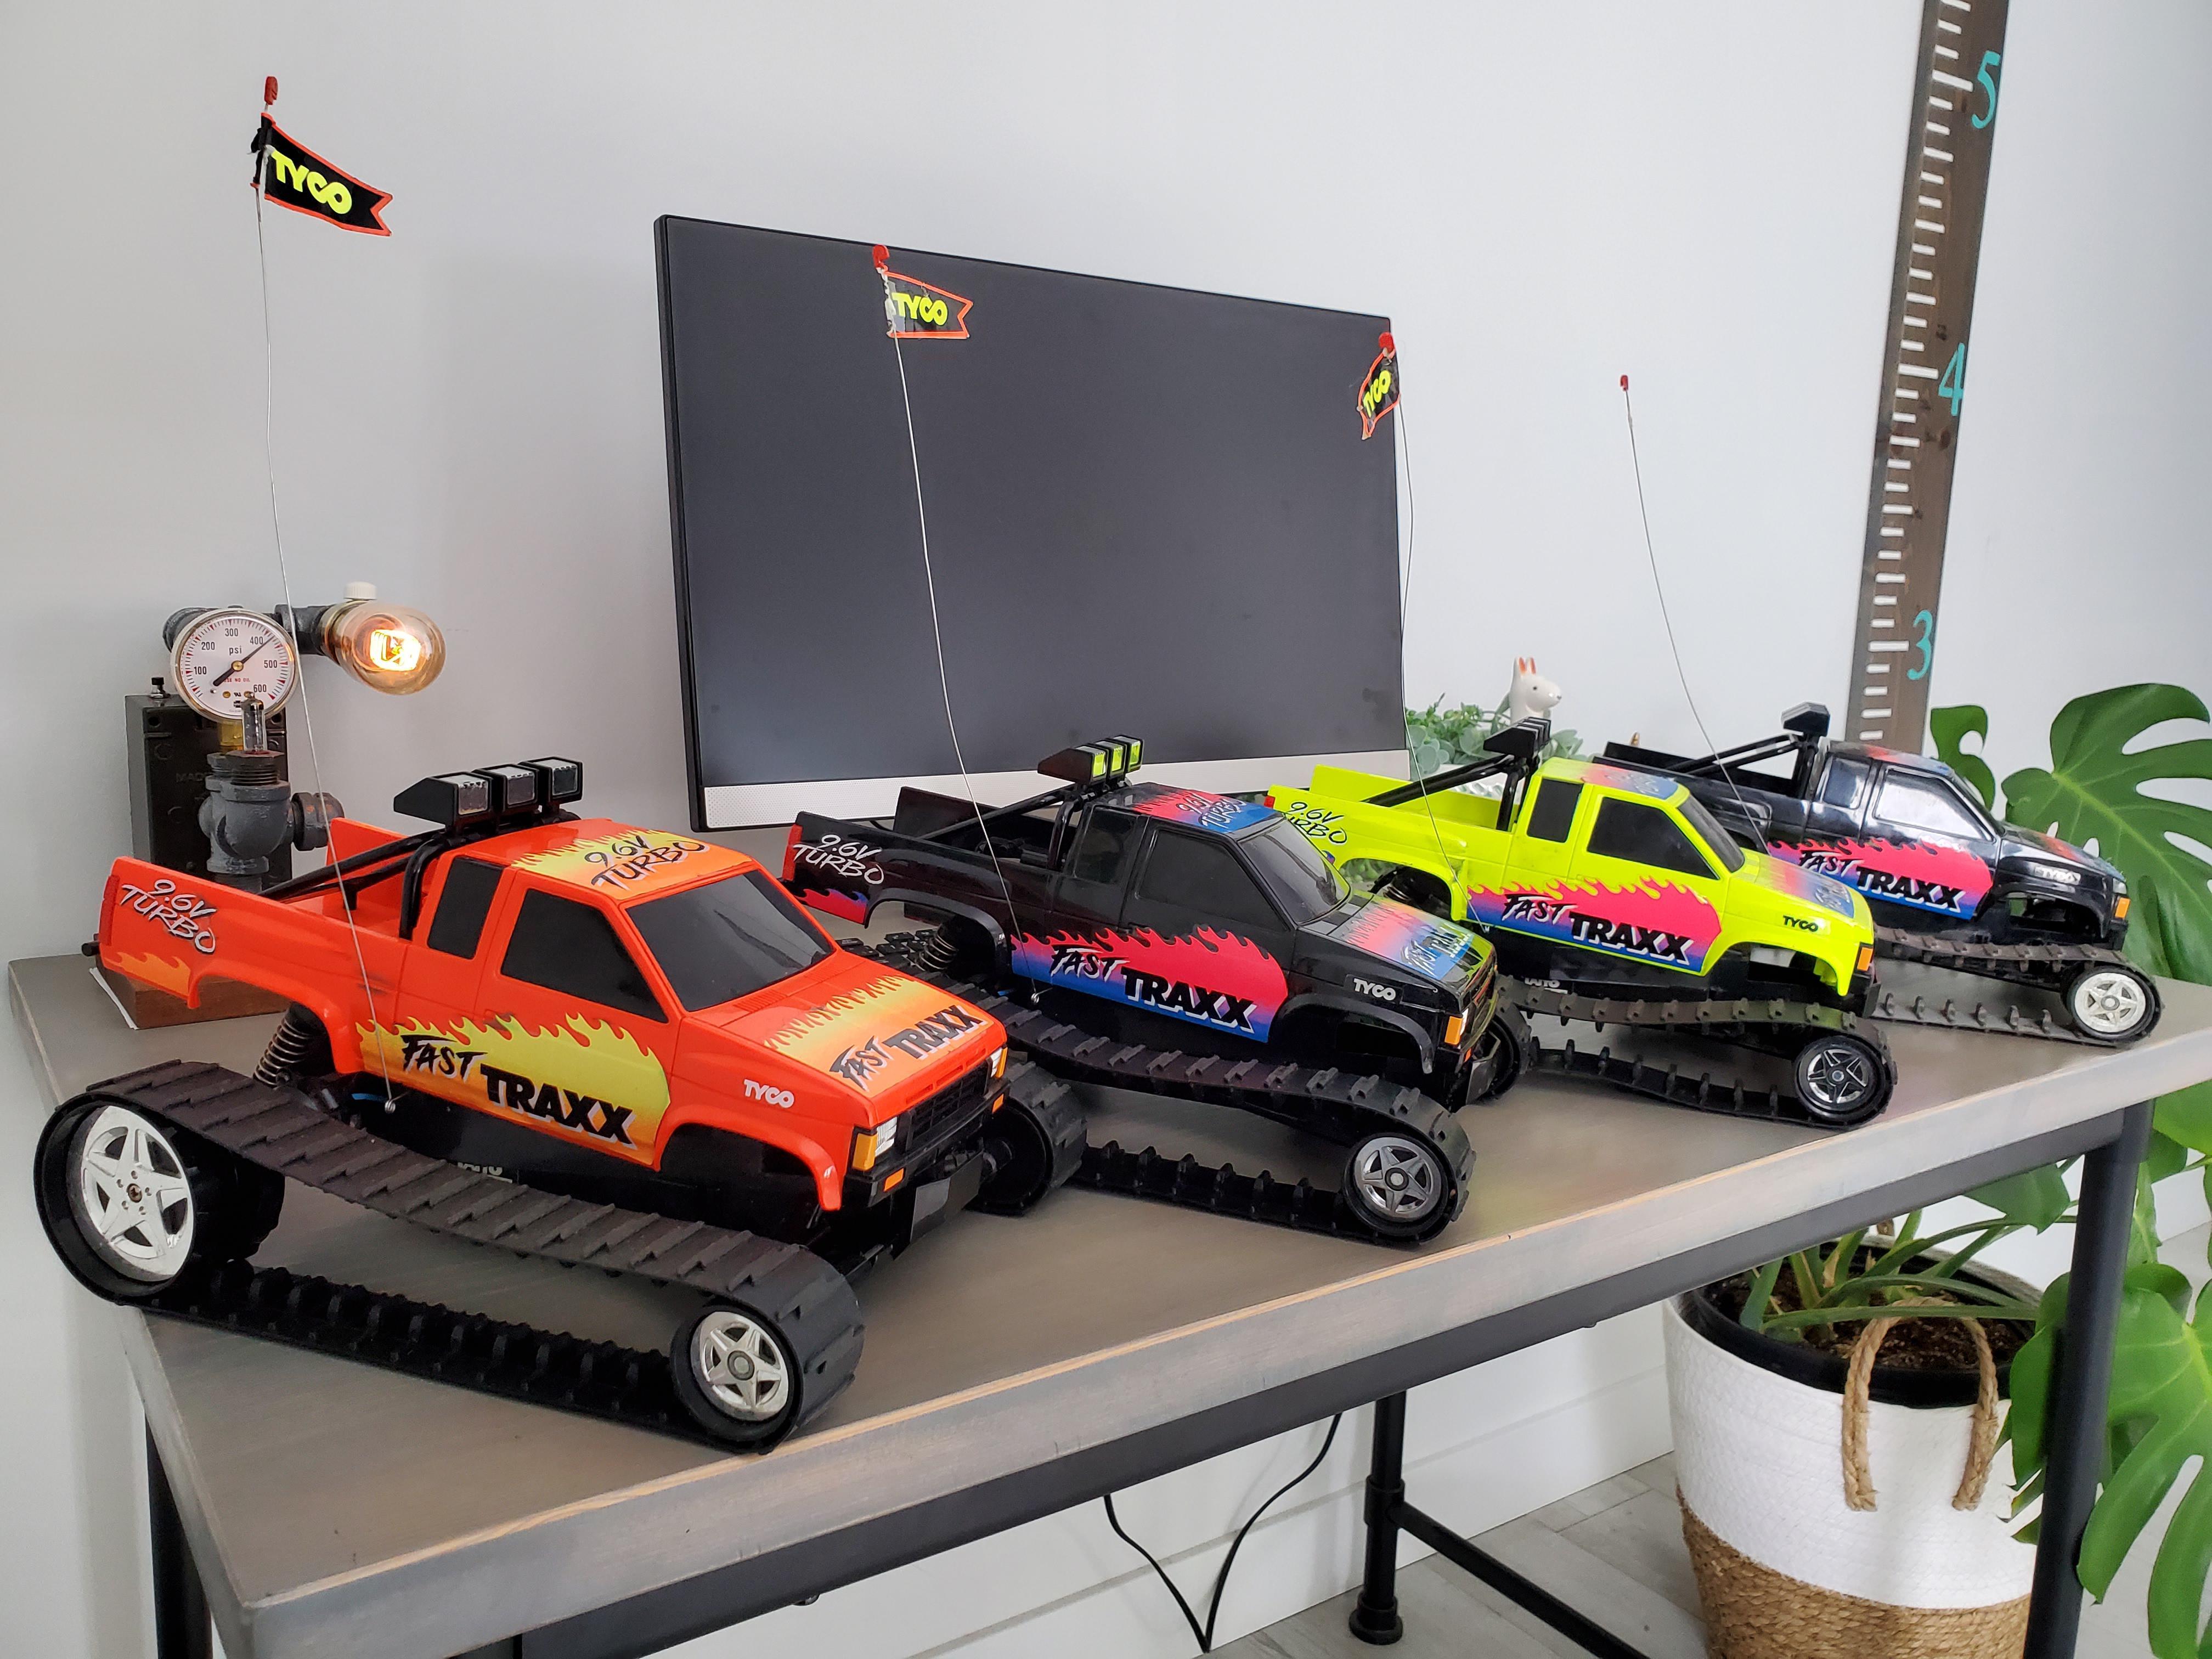 Tyco Rc Cars: Find Your Dream Tyco RC Car Today!